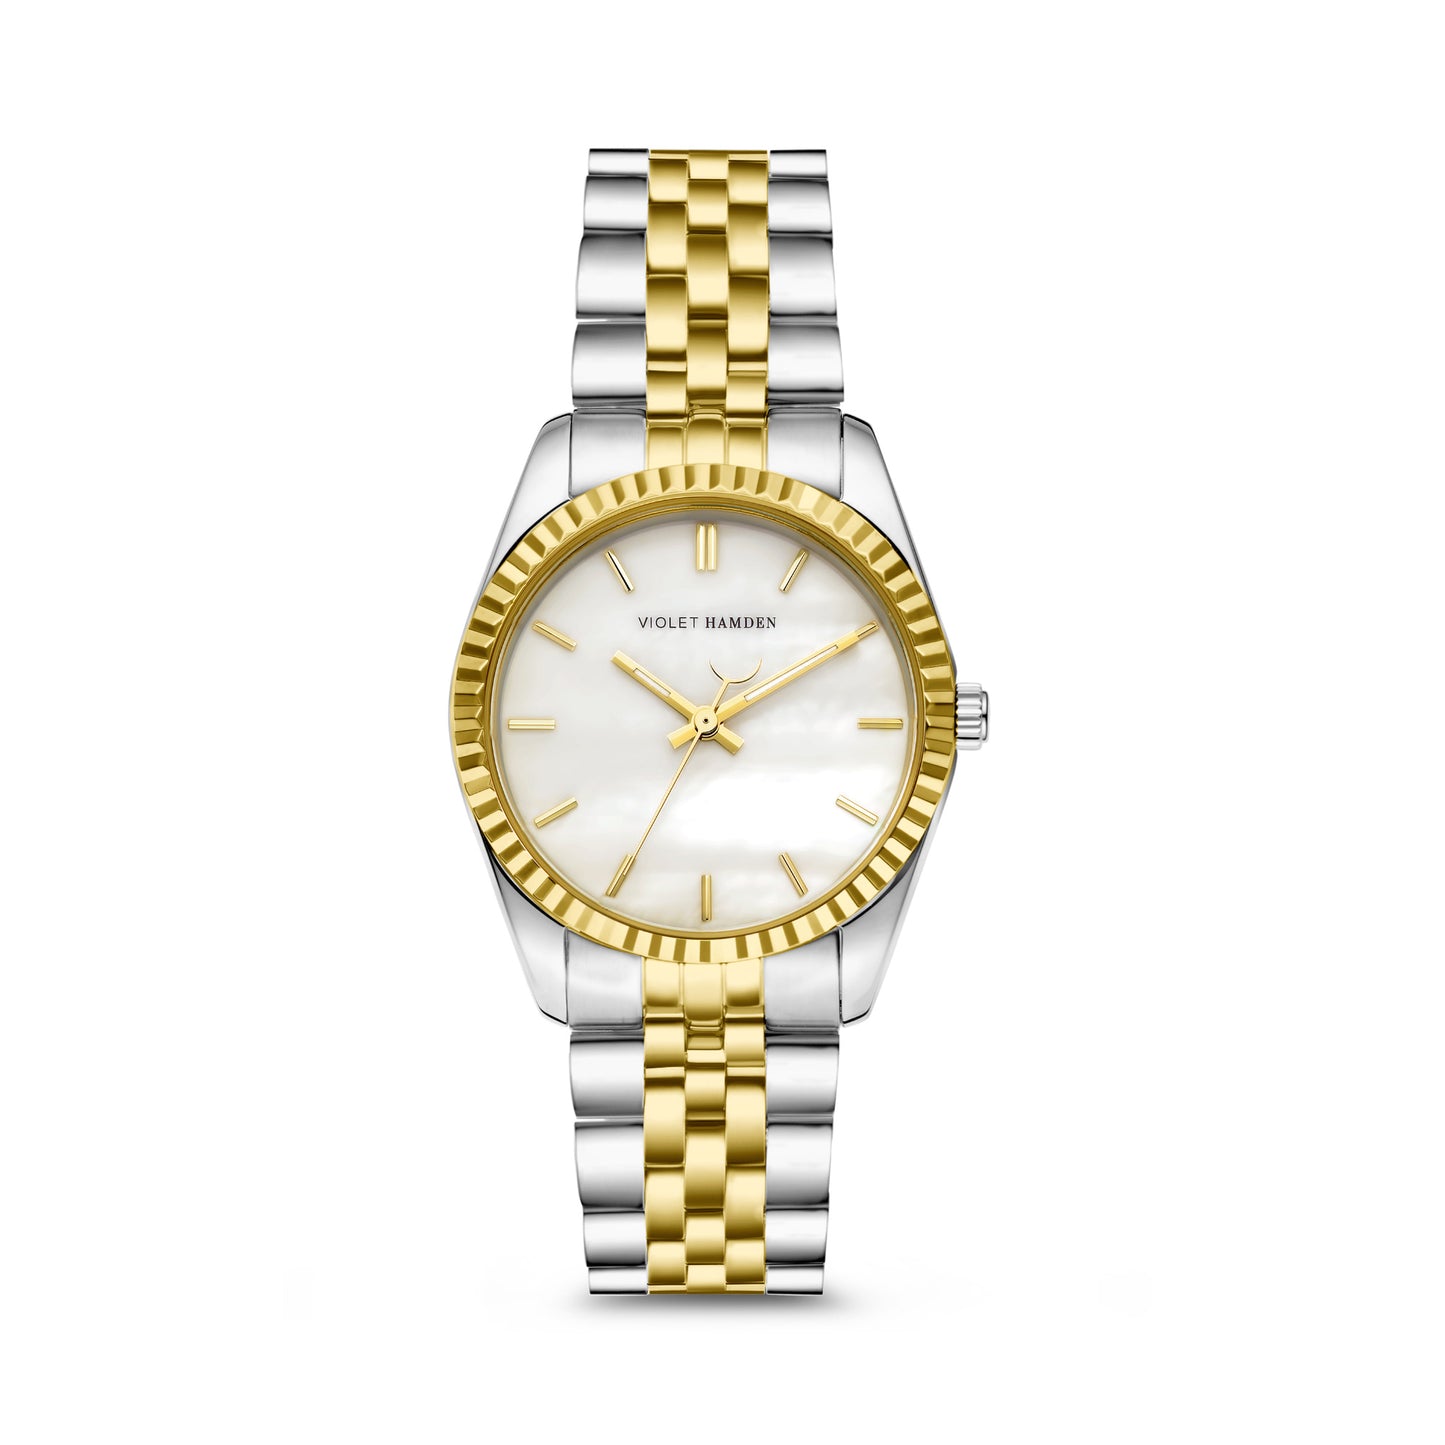 Sunrise round ladies watch gold and silver coloured and mother of pearl